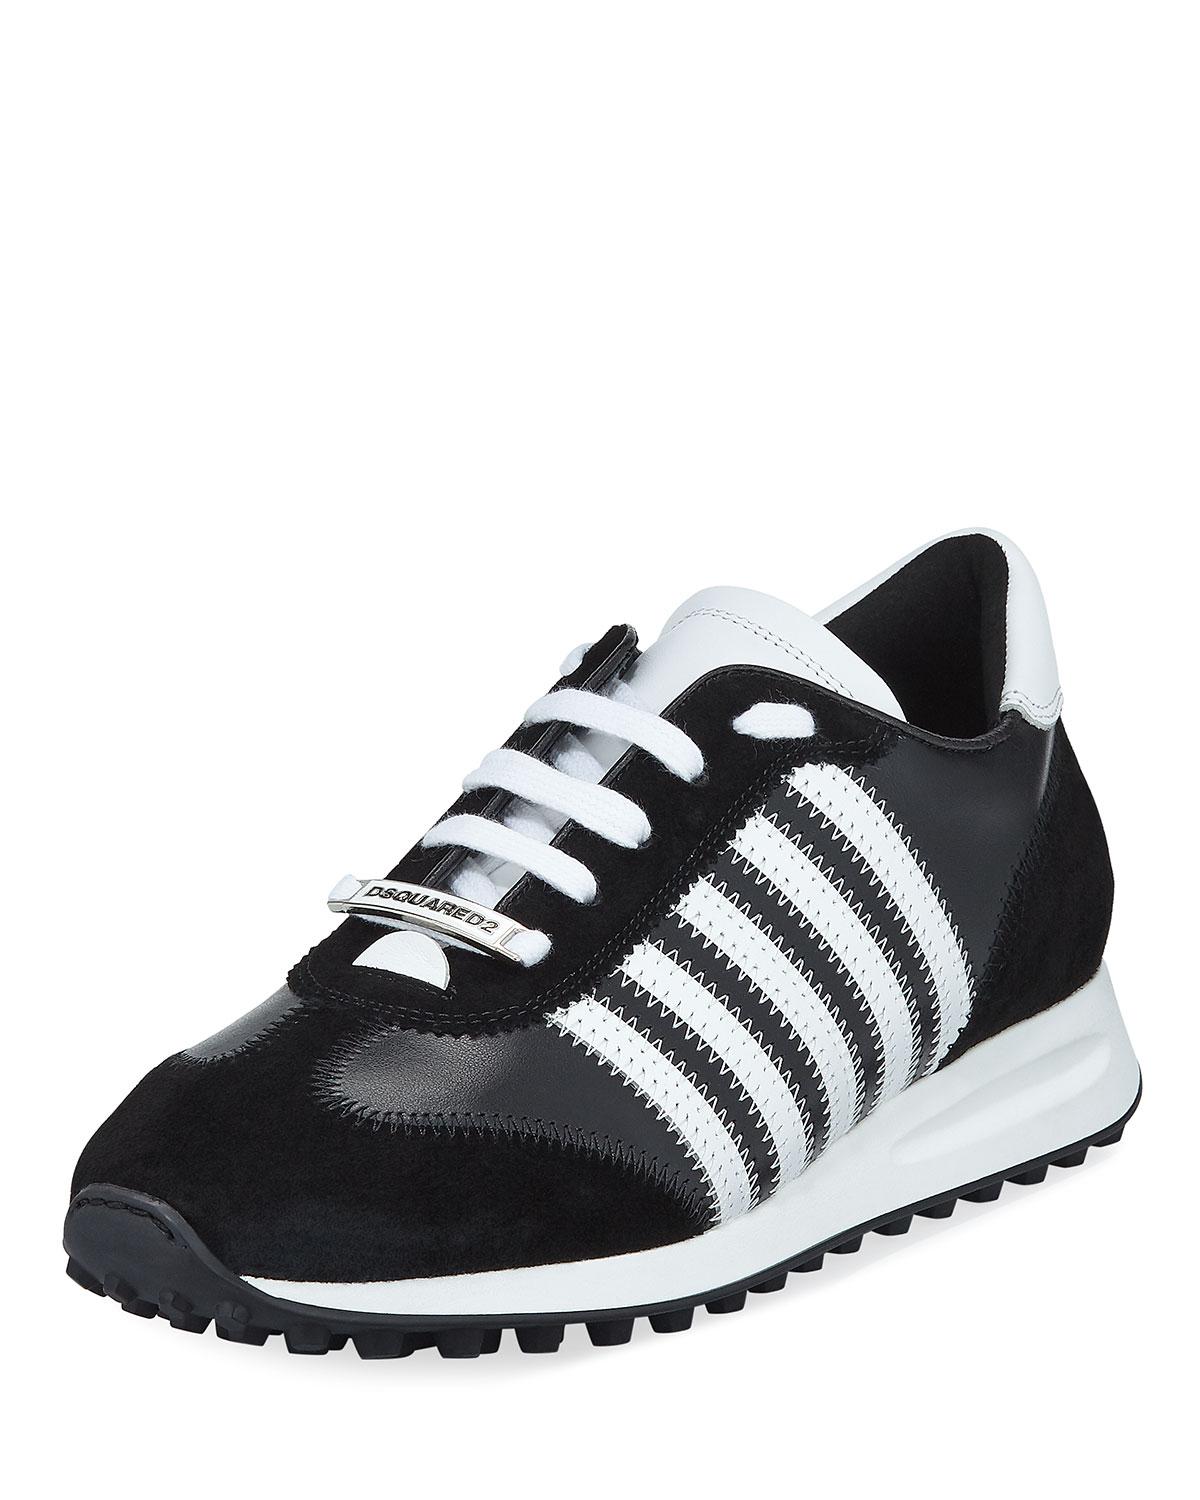 dsquared2 new runner hiking sneakers